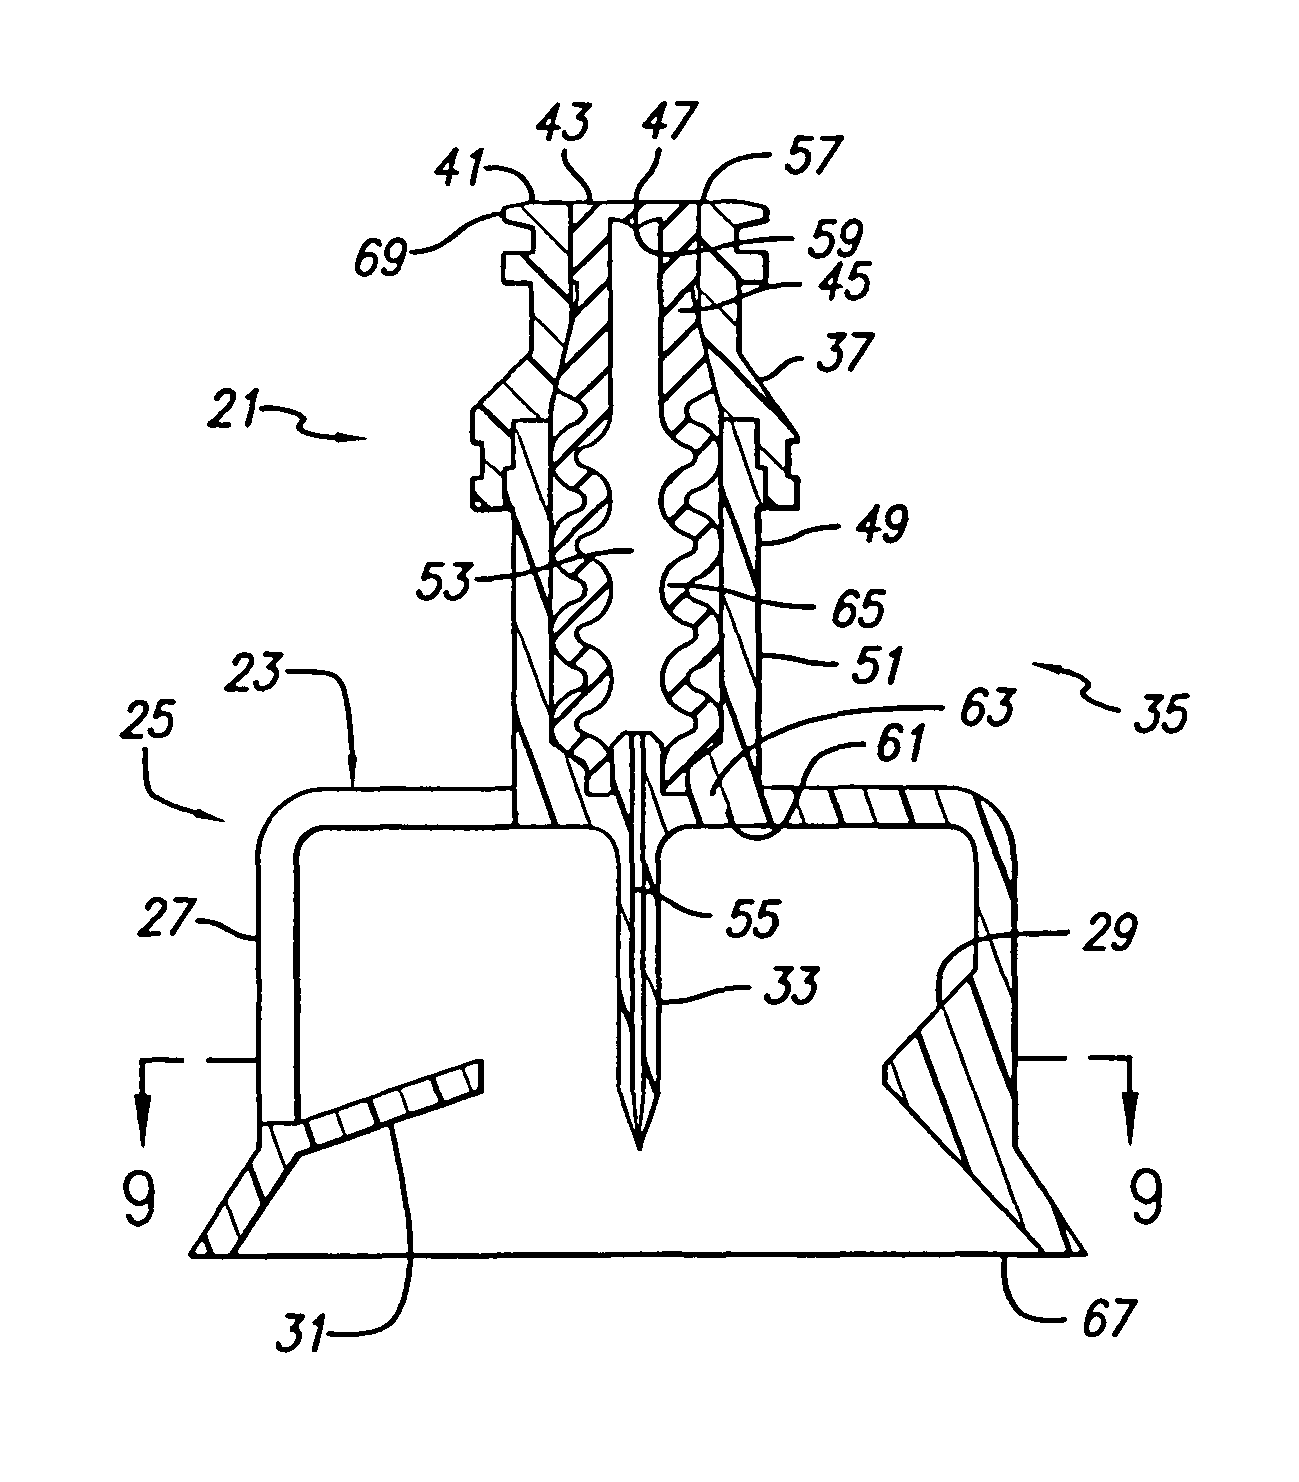 Vial adapter having a needle-free valve for use with vial closures of different sizes